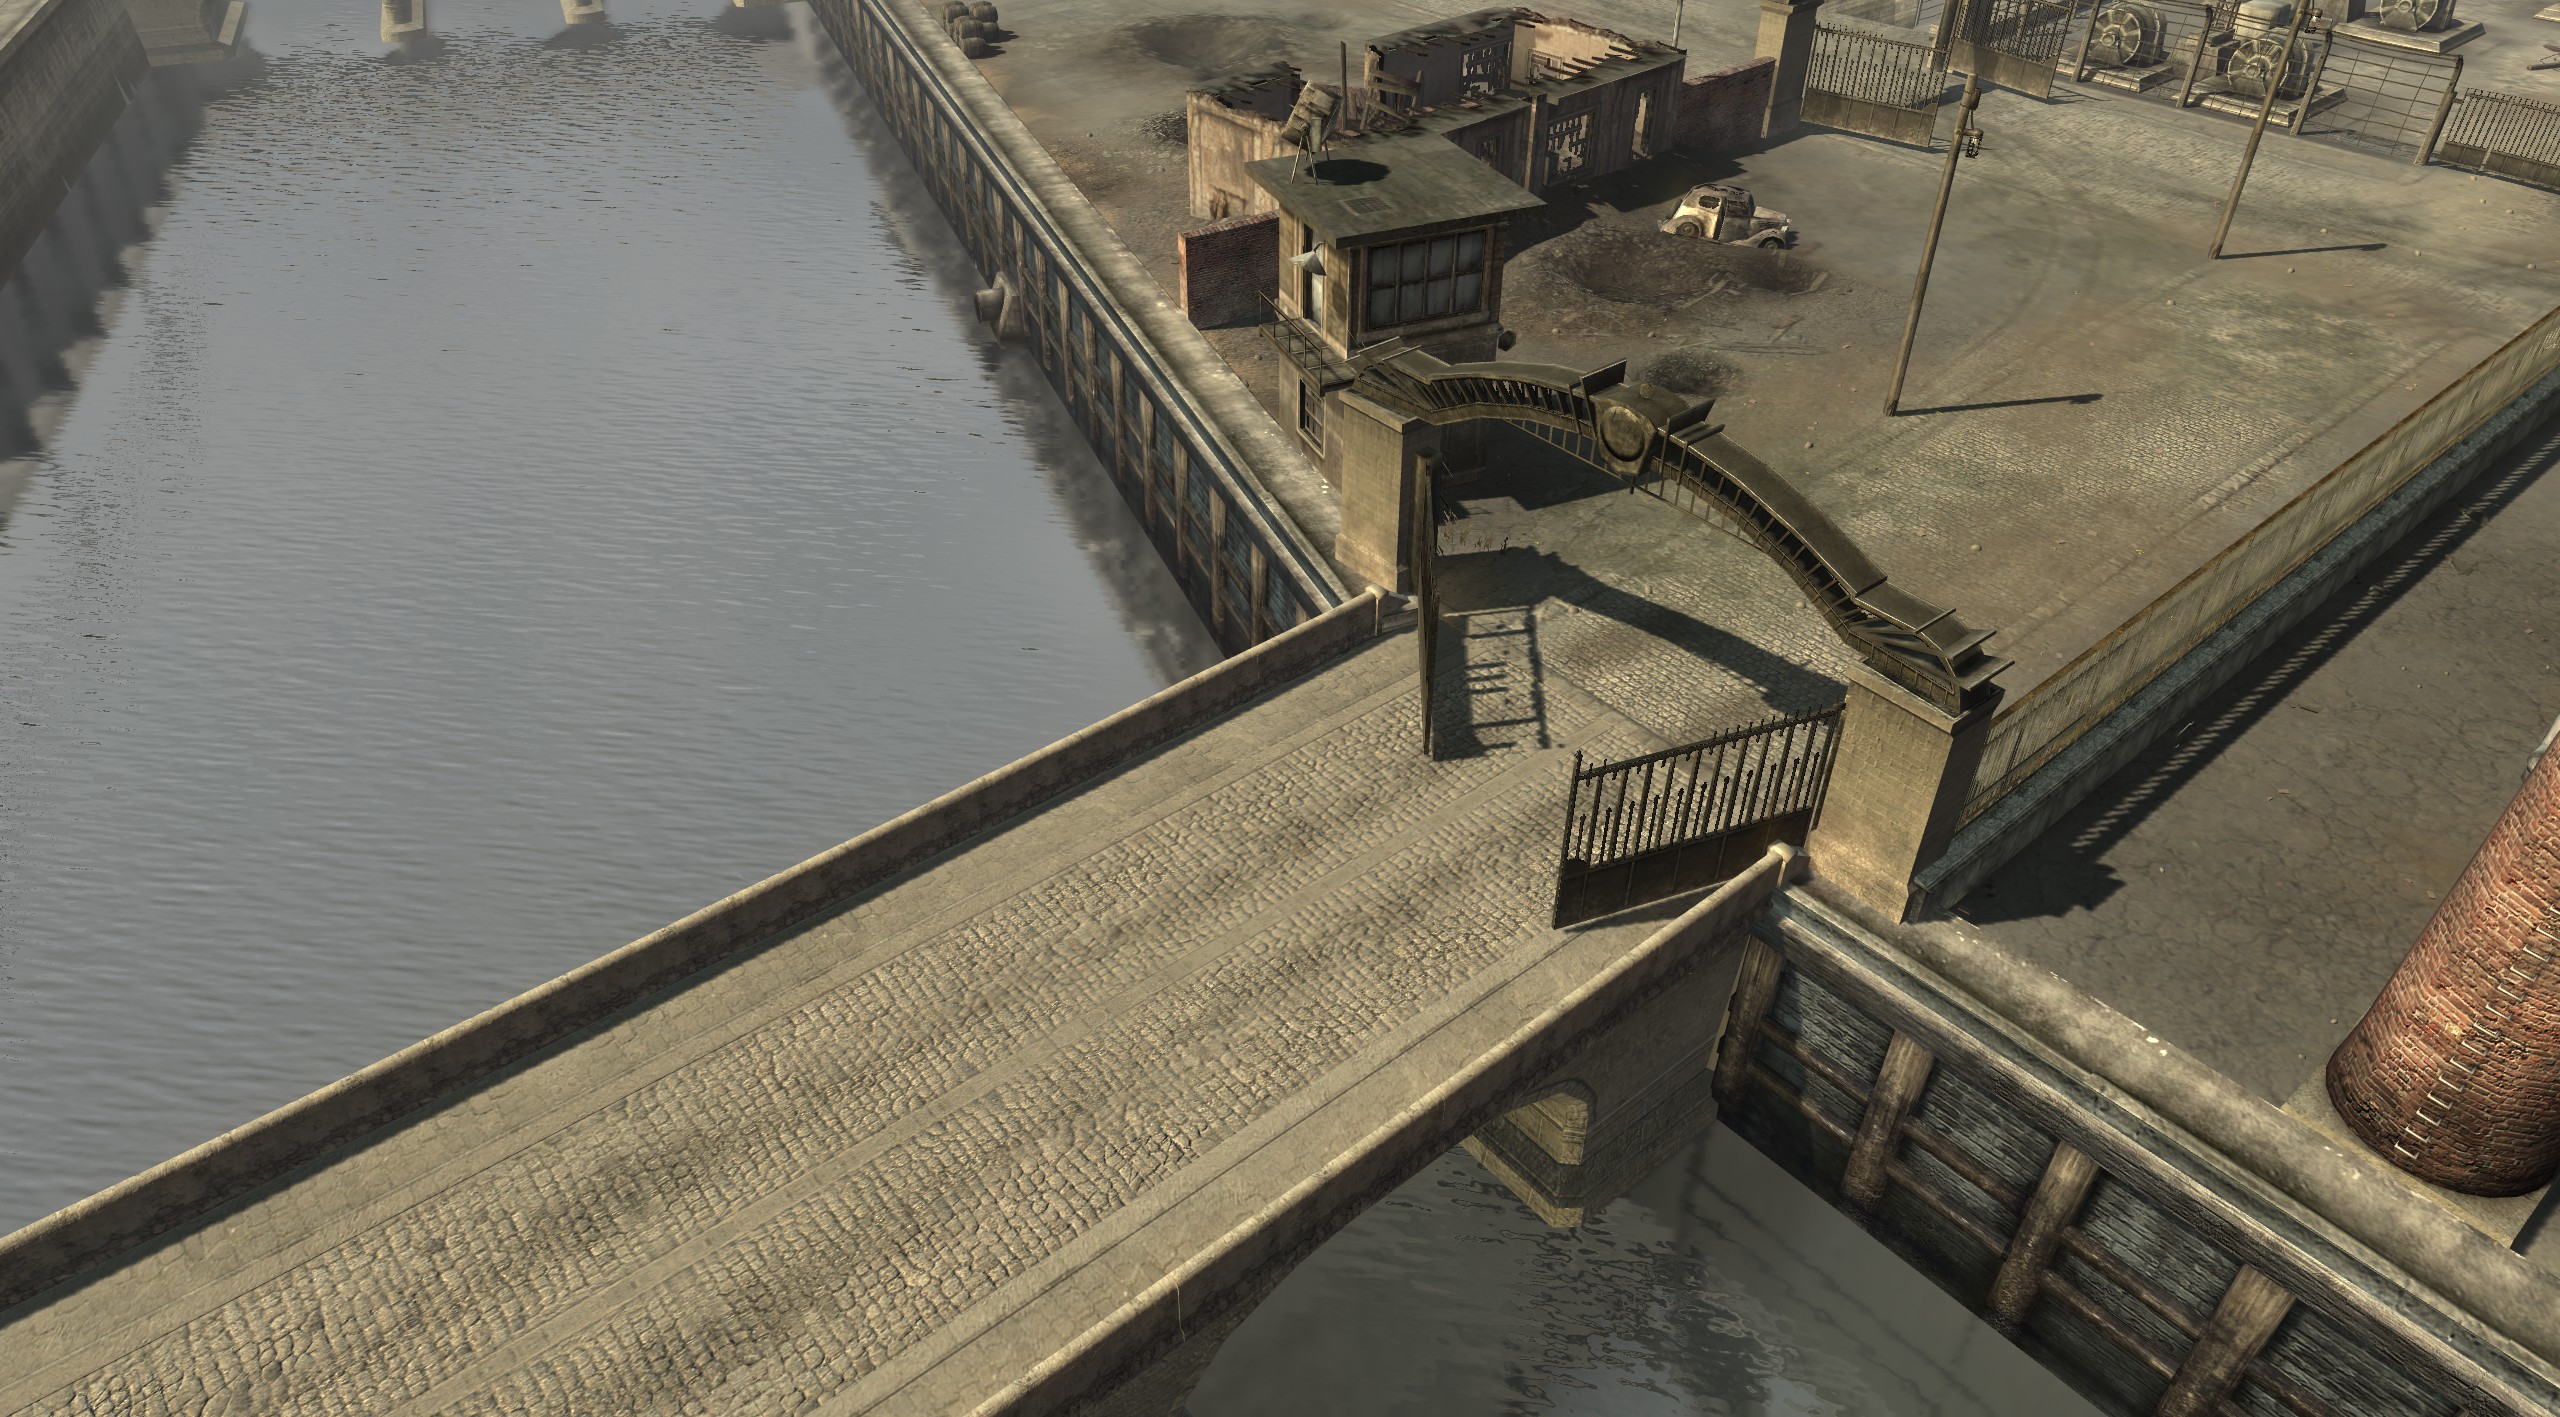 An example of one of the bridges with a gap large enough for infantry, but blocking jeeps/motorcycles.